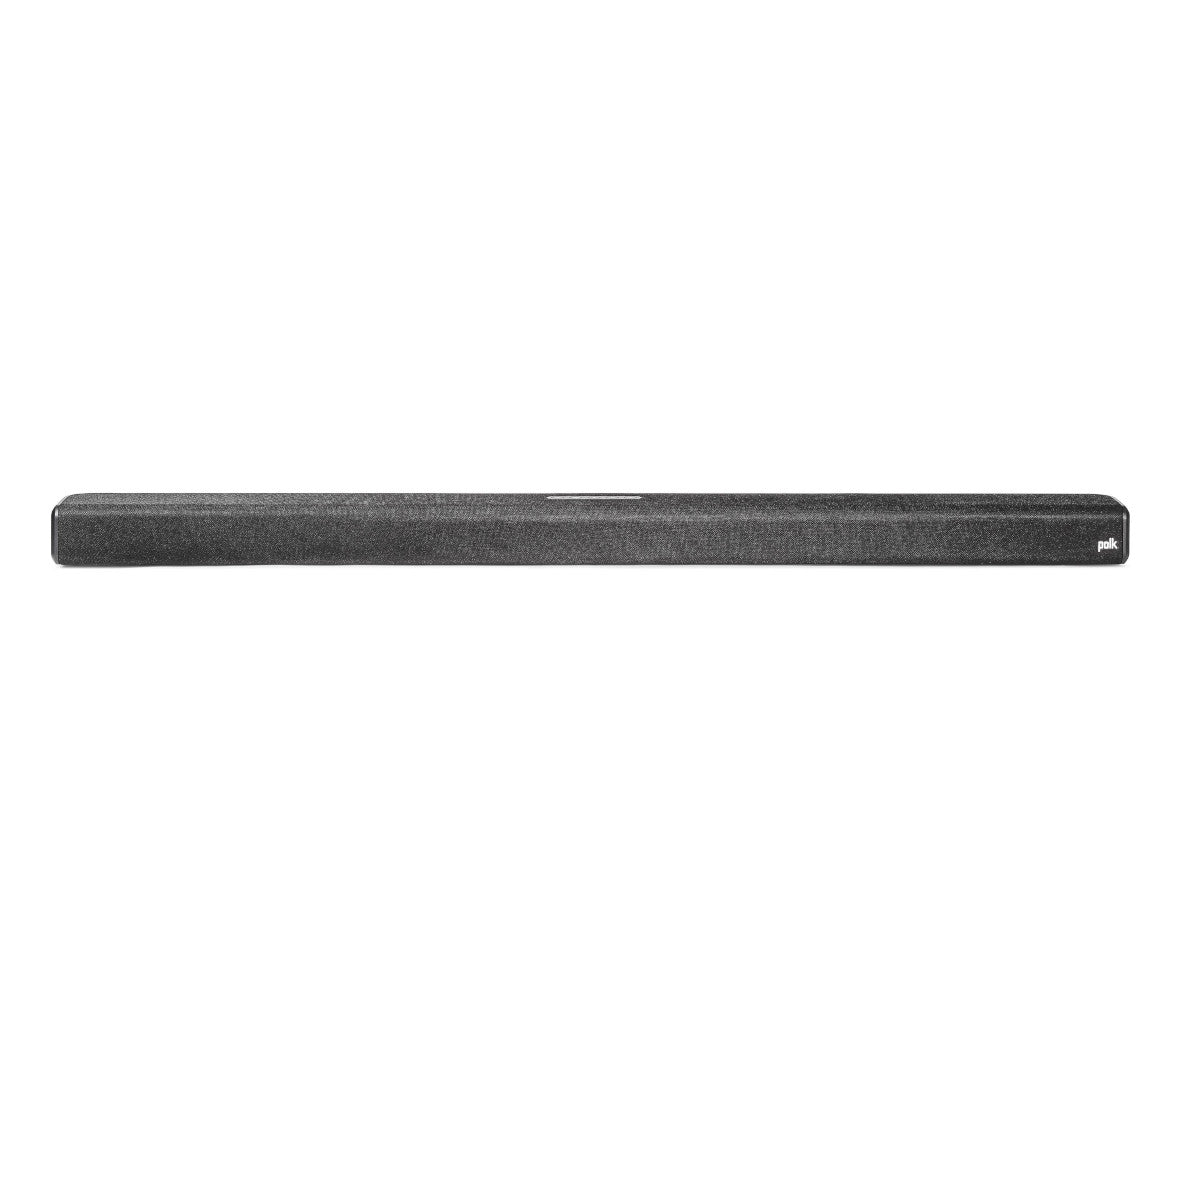 Polk Audio Signa S4 True Dolby Atmos Soundbar with Wireless Subwoofer, EARC and Bluetooth - Ooberpad India